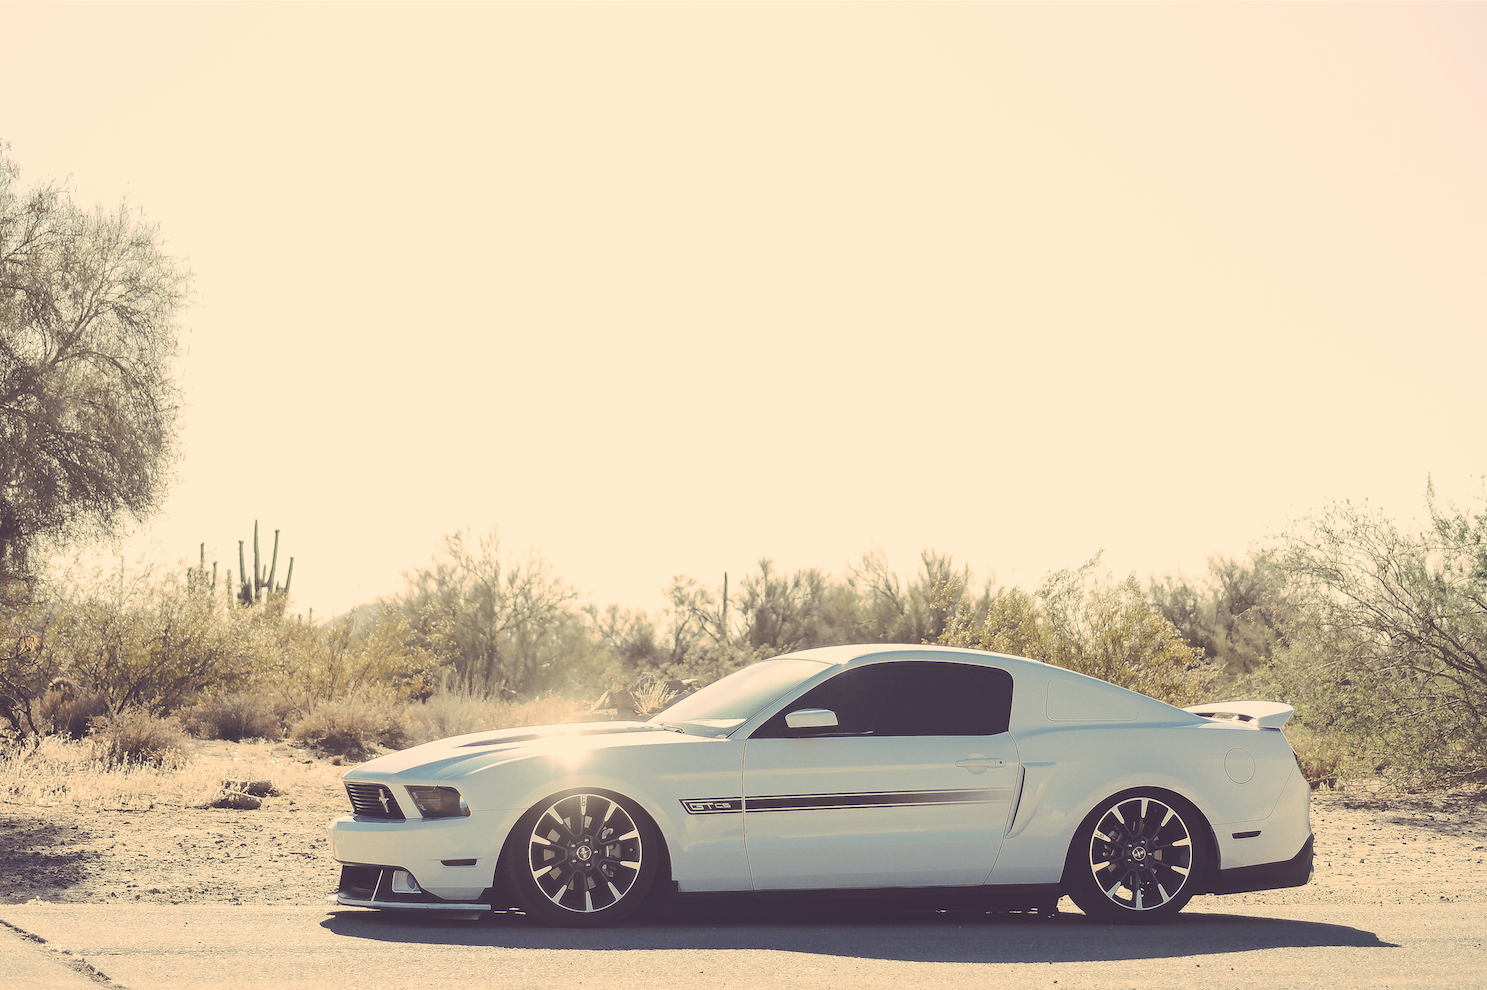 Photo by Jonathan Daniels - 2012 Ford Mustang